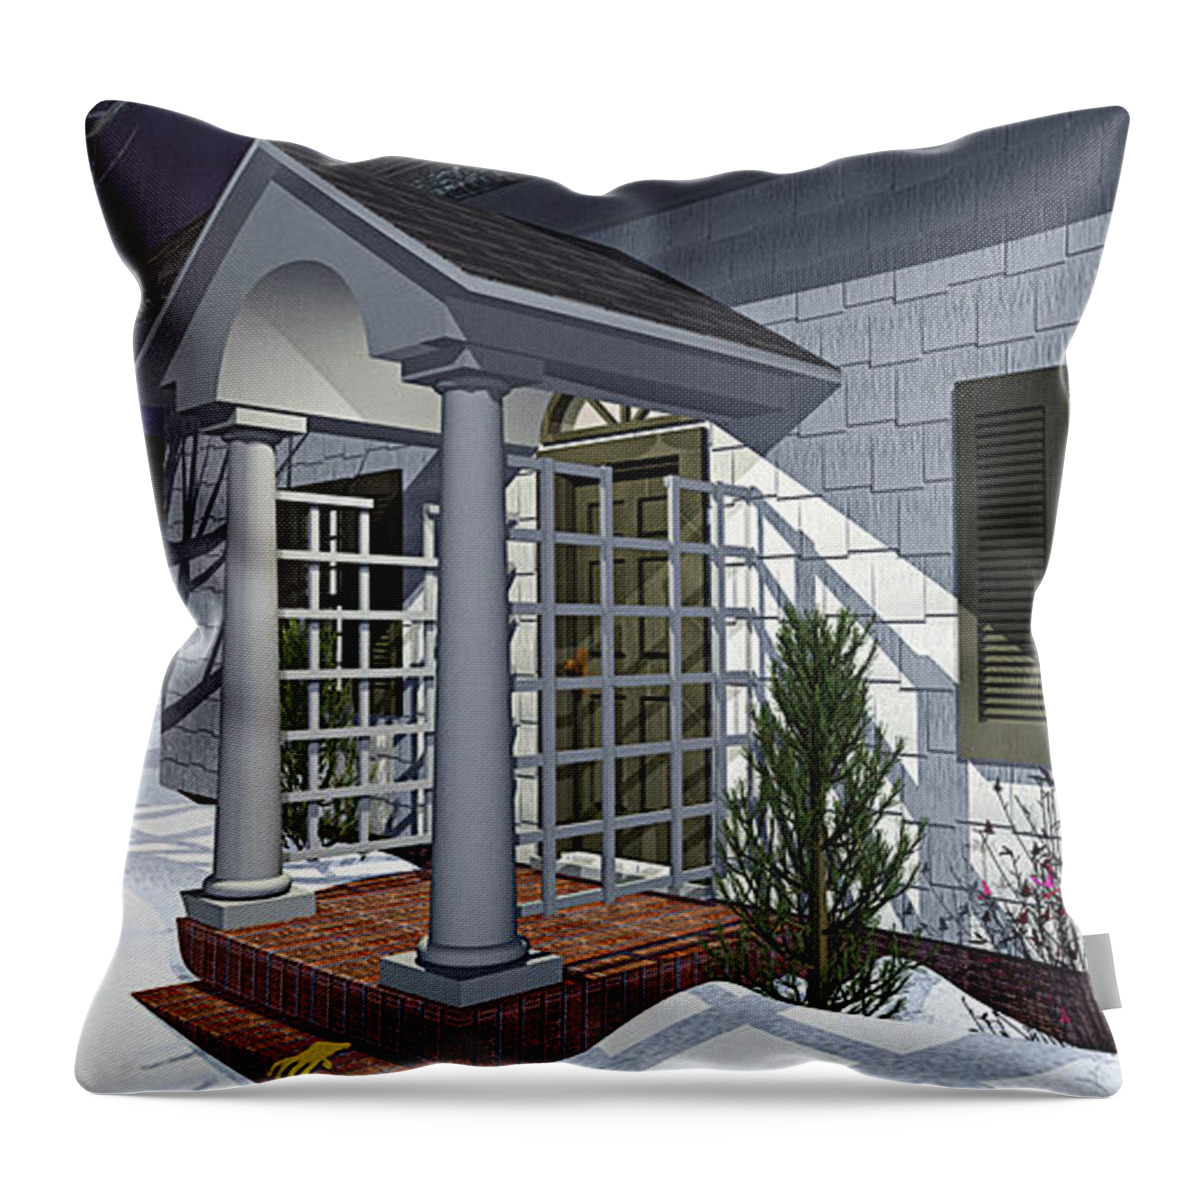 Porch Throw Pillow featuring the photograph Leave the Porch Light On by Peter J Sucy